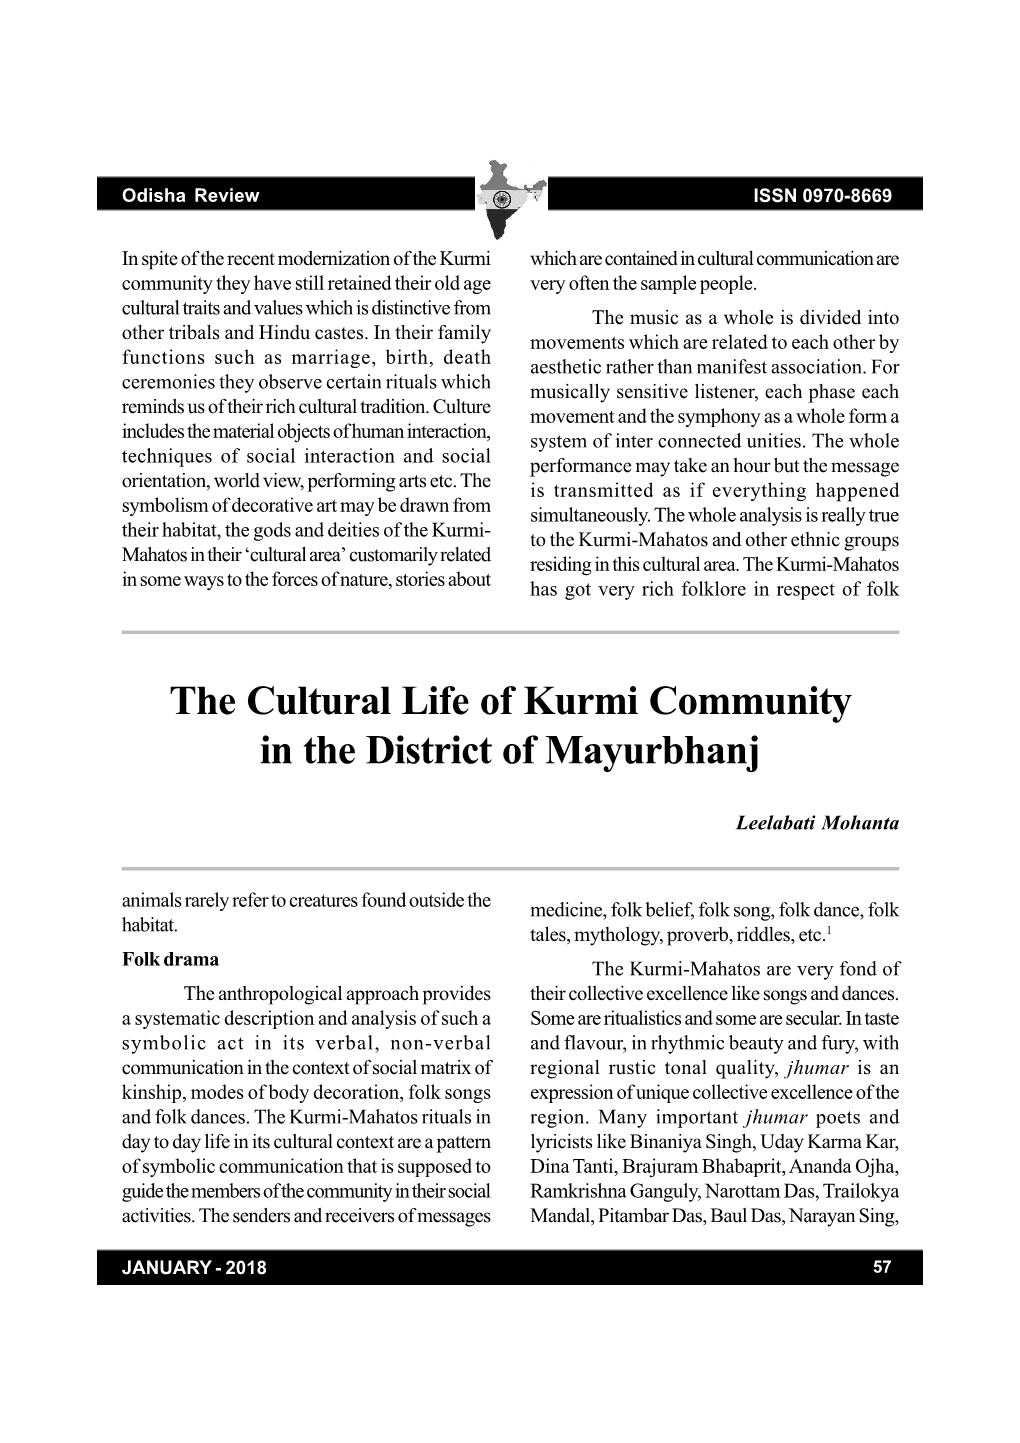 The Cultural Life of Kurmi Community in the District of Mayurbhanj